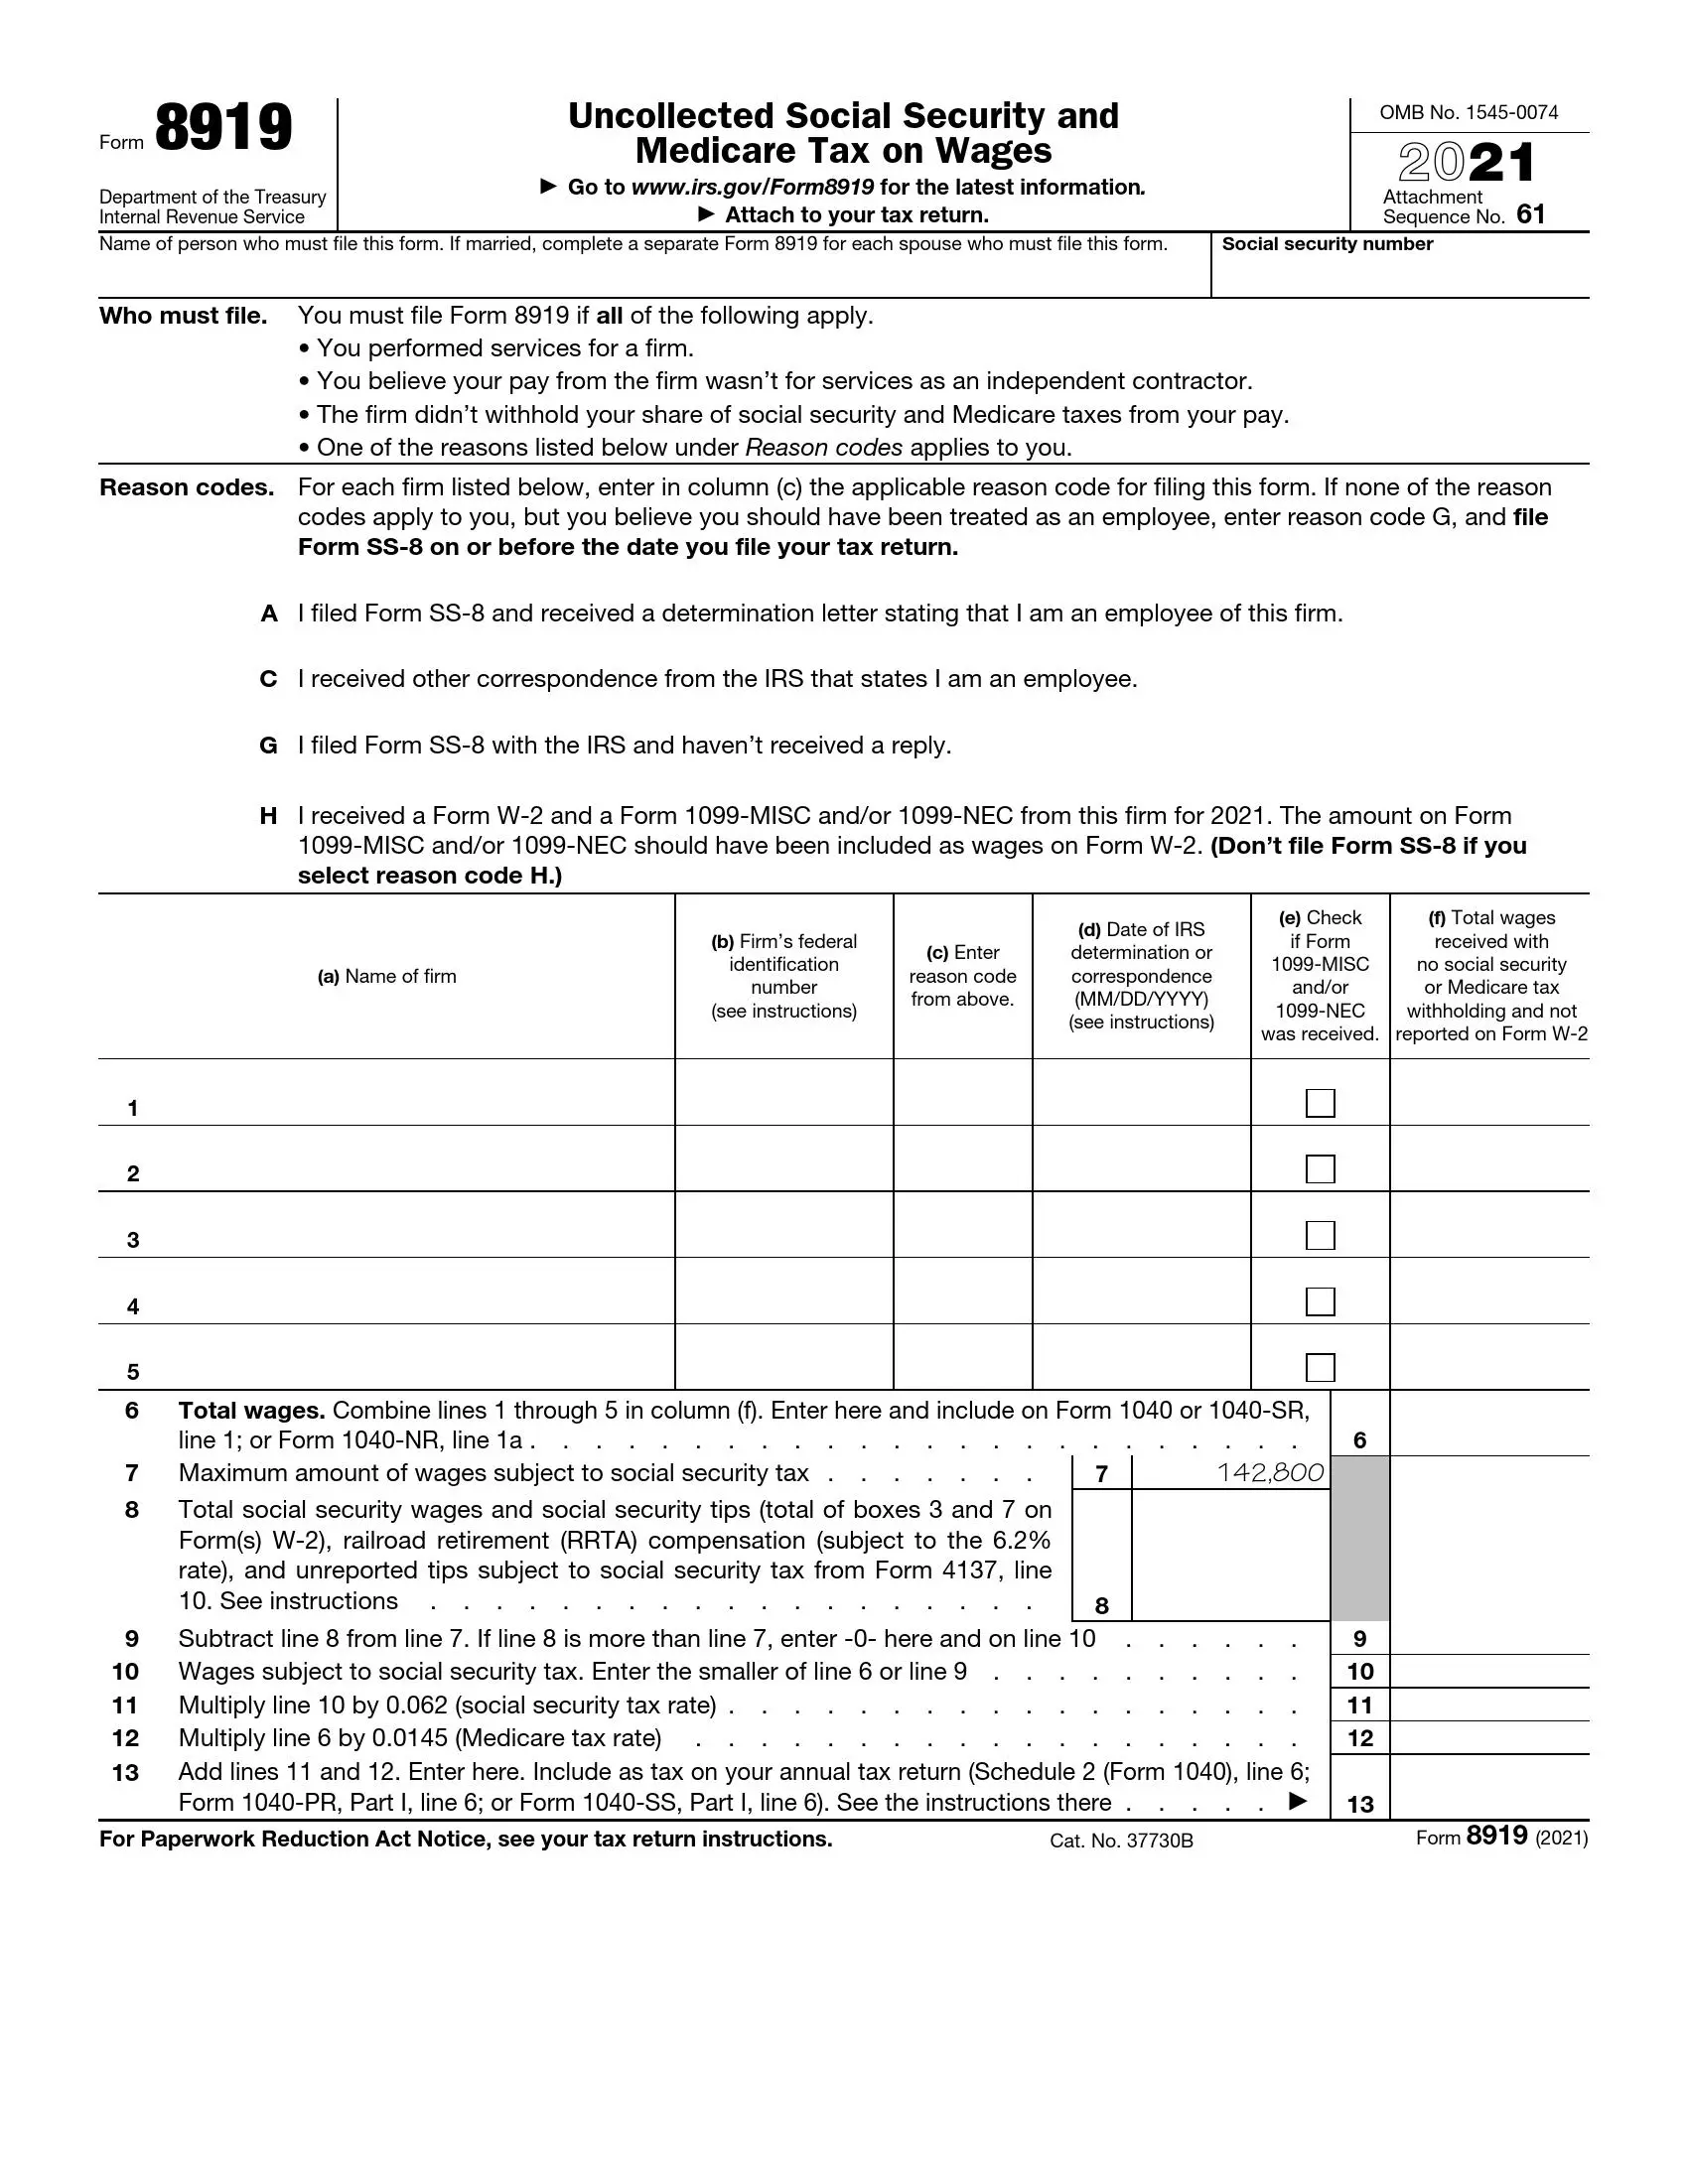 irs form 8919 2021 preview